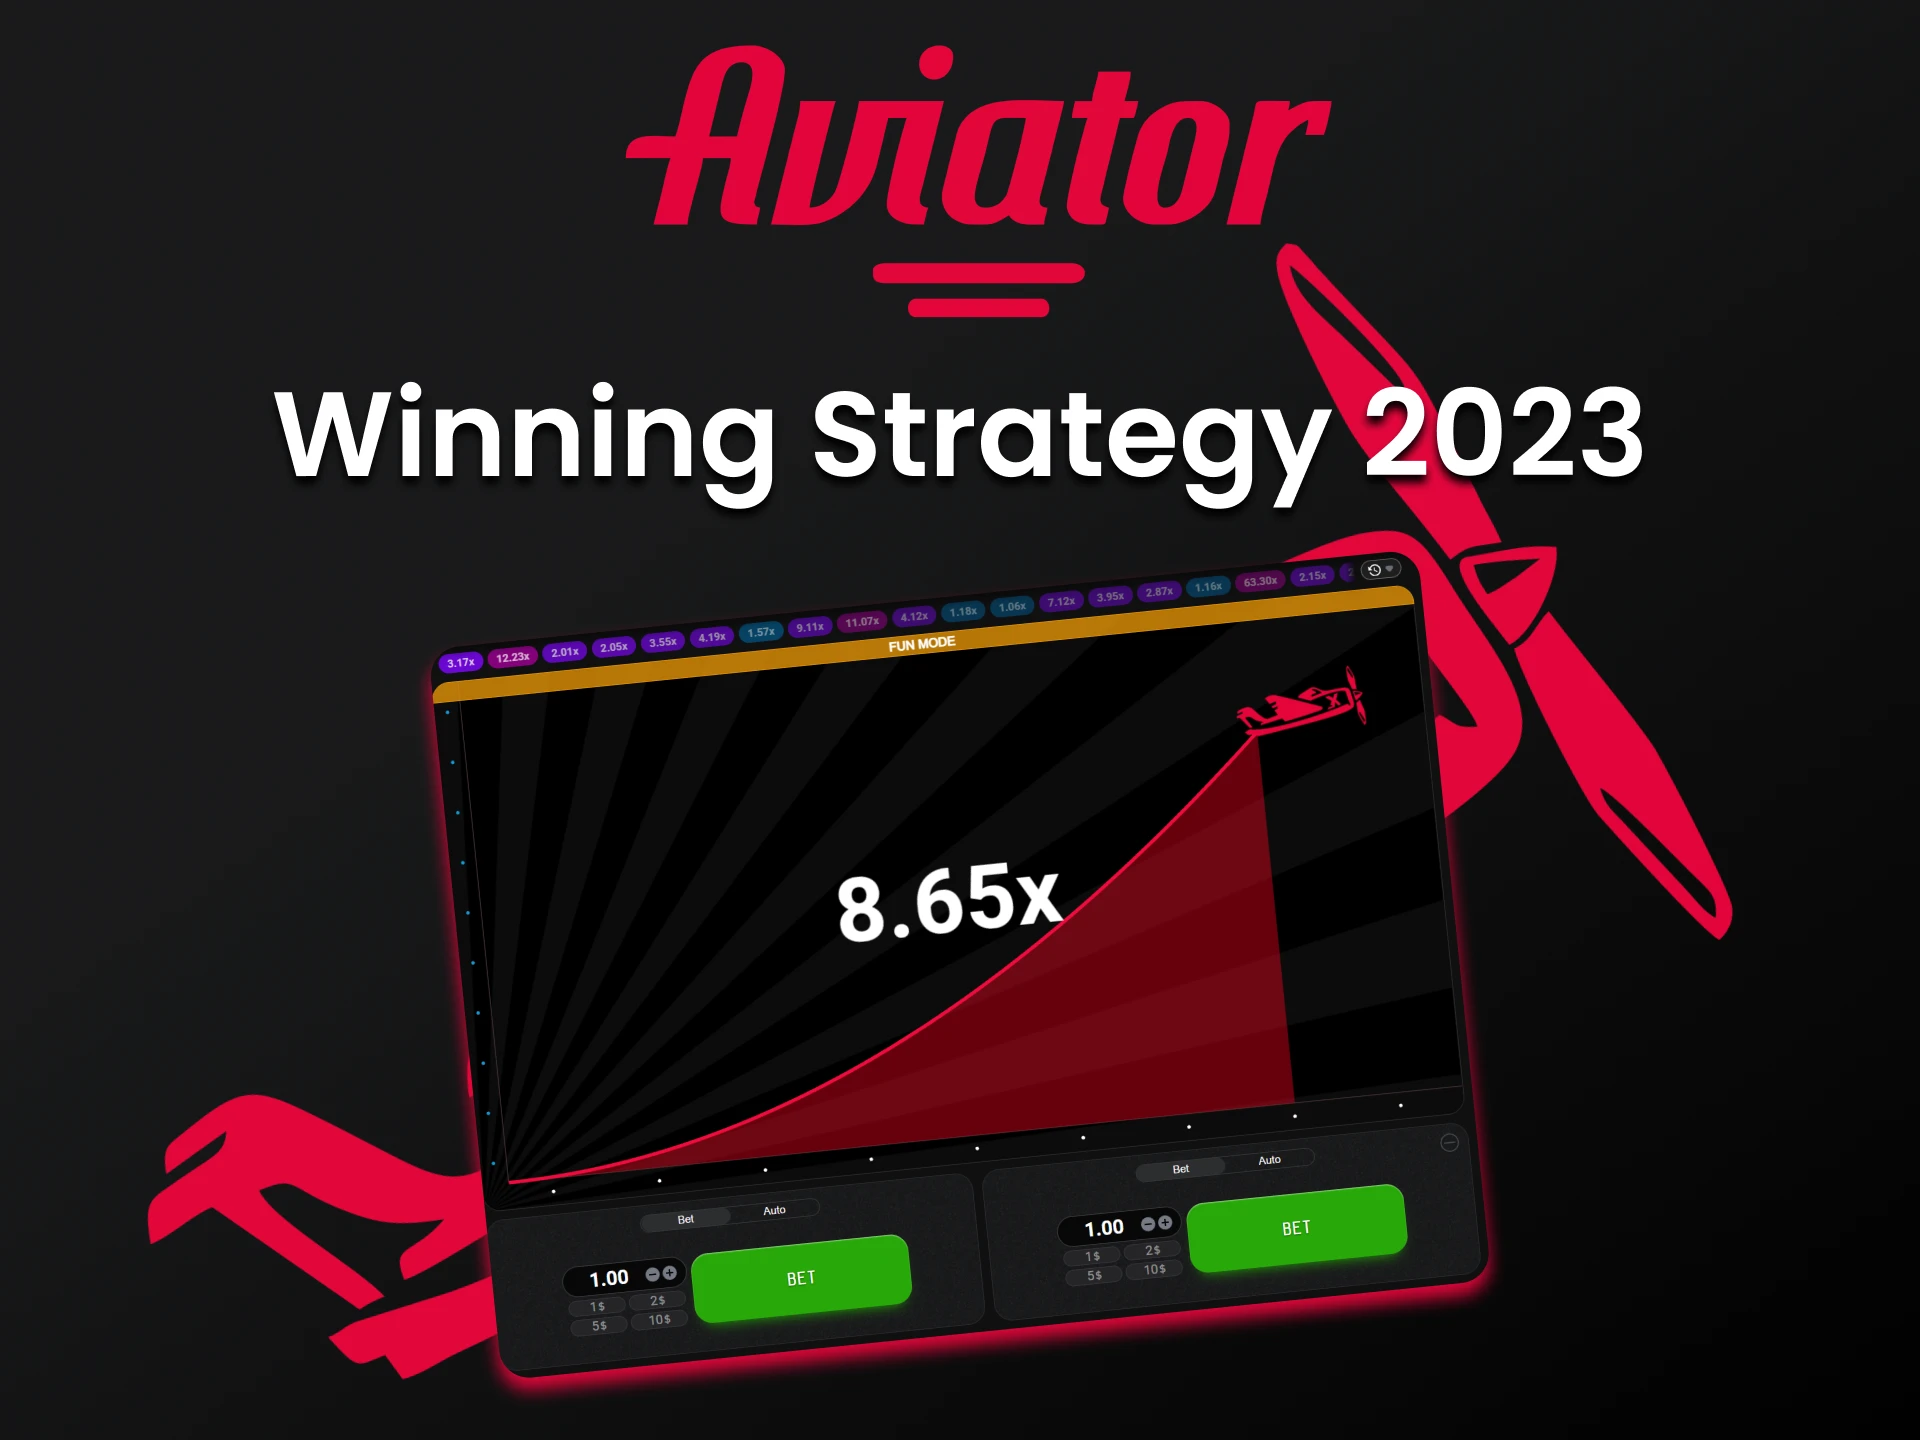 Use strategies that will bring you victory in the Aviator money game.